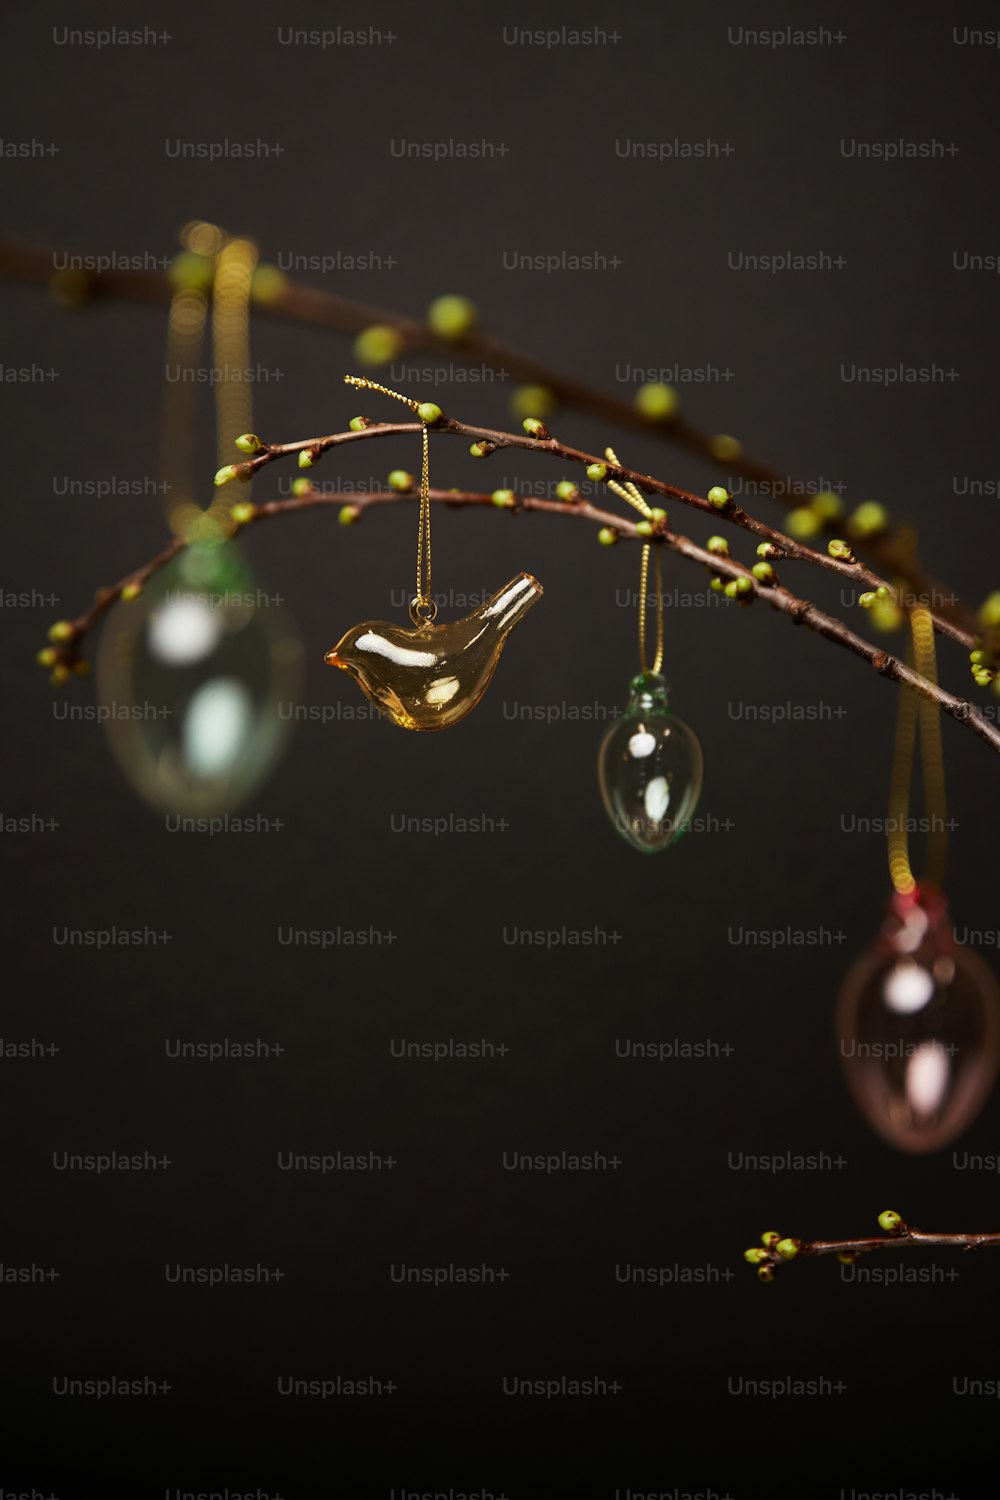 a branch with three ornaments hanging from it